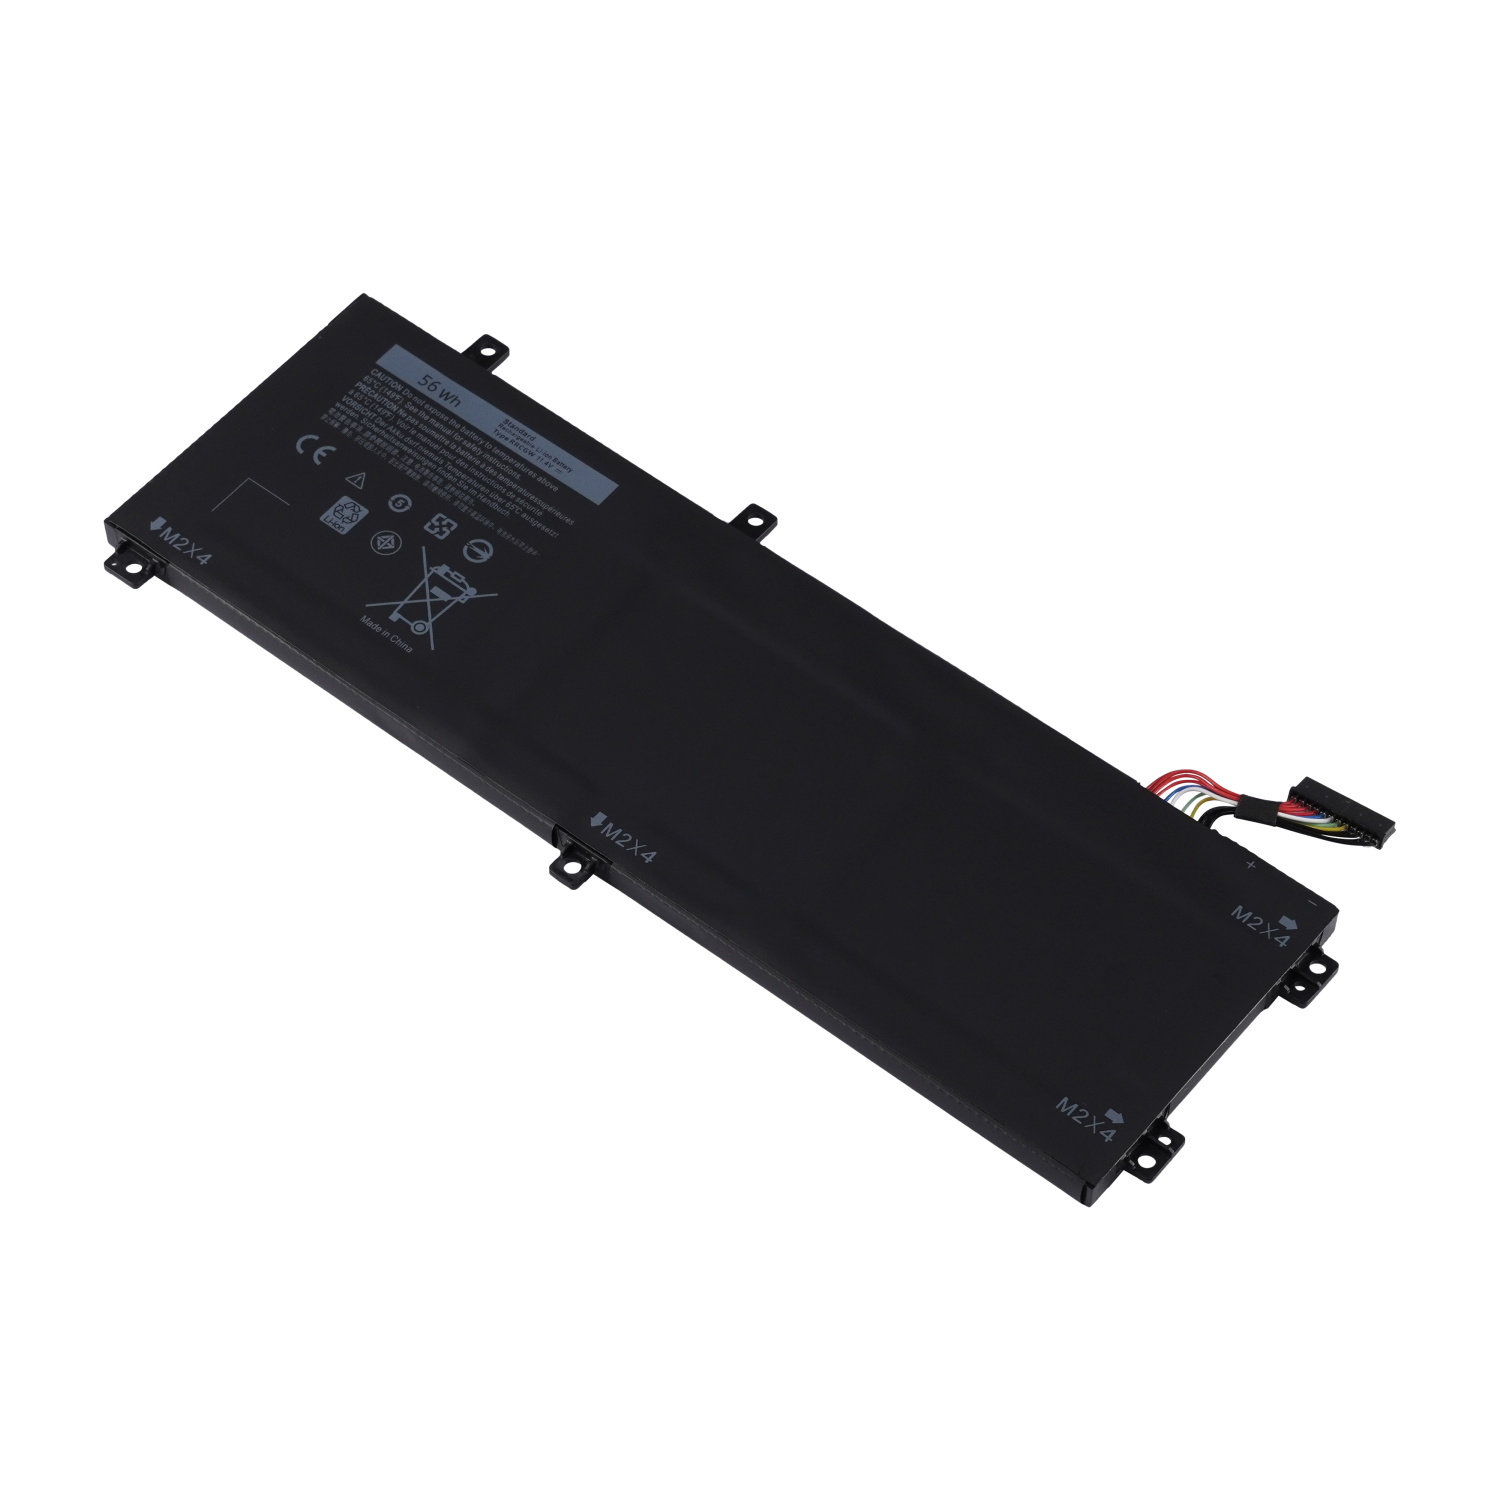 RRCGW replacement lithium ion Notebook battery Laptop battery M7R96 62MJV 11.4 V 55Wh for Dell laptop XPS 15 9550 Precision 5510 